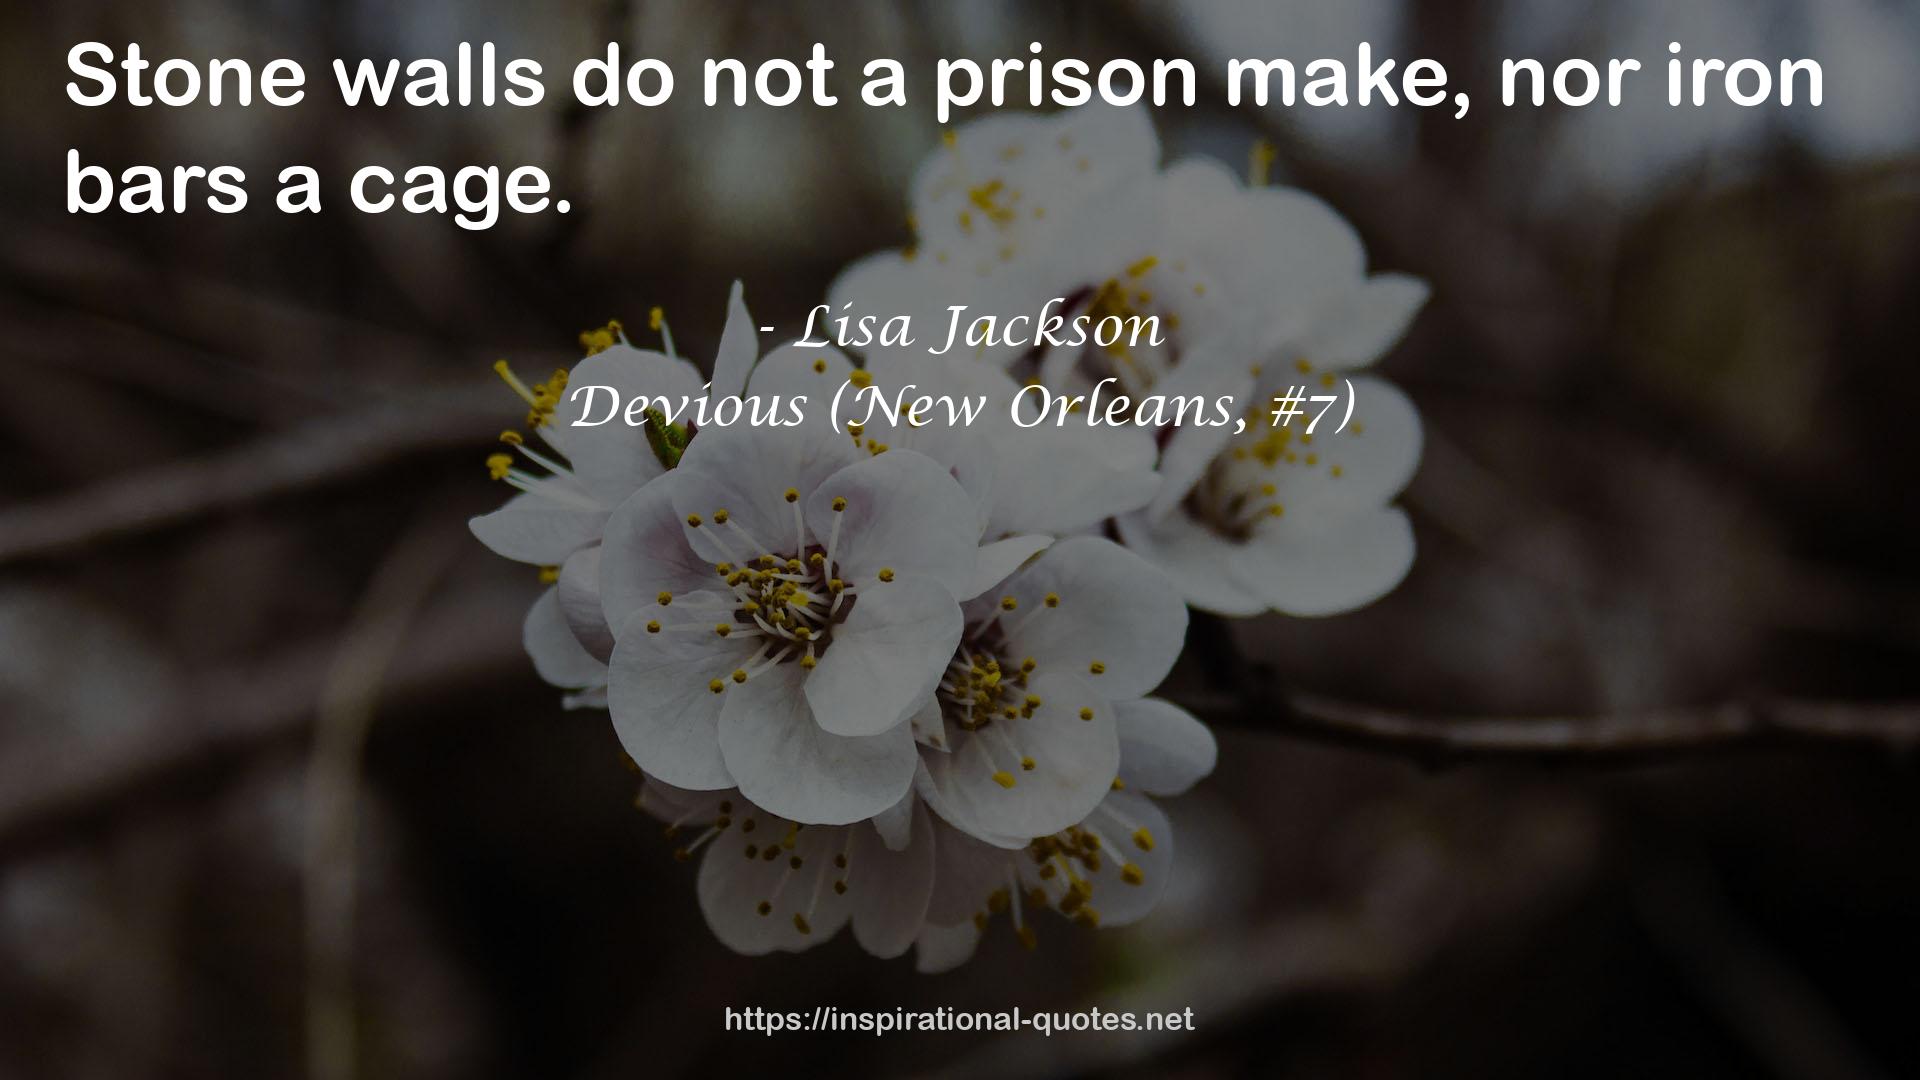 Devious (New Orleans, #7) QUOTES